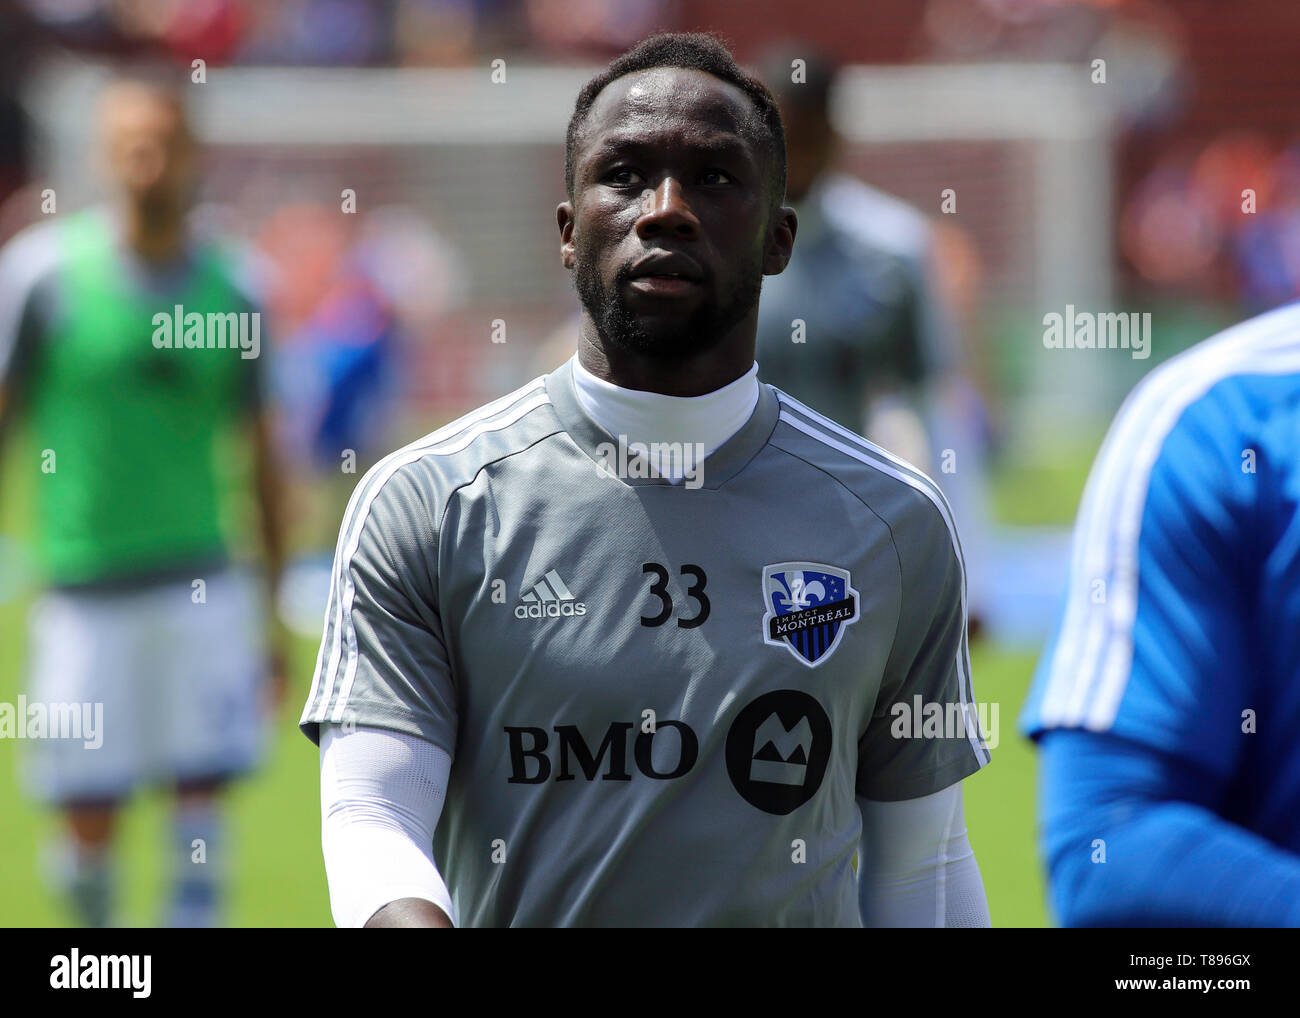 Cincinnati, Ohio, USA. 11th May, 2019. Bacary Sagna of the Montreal Impact prior to an MLS soccer game between FC Cincinnati and Montreal Impact at Nippert Stadium in Cincinnati, Ohio. Kevin Schultz/CSM/Alamy Live News Stock Photo